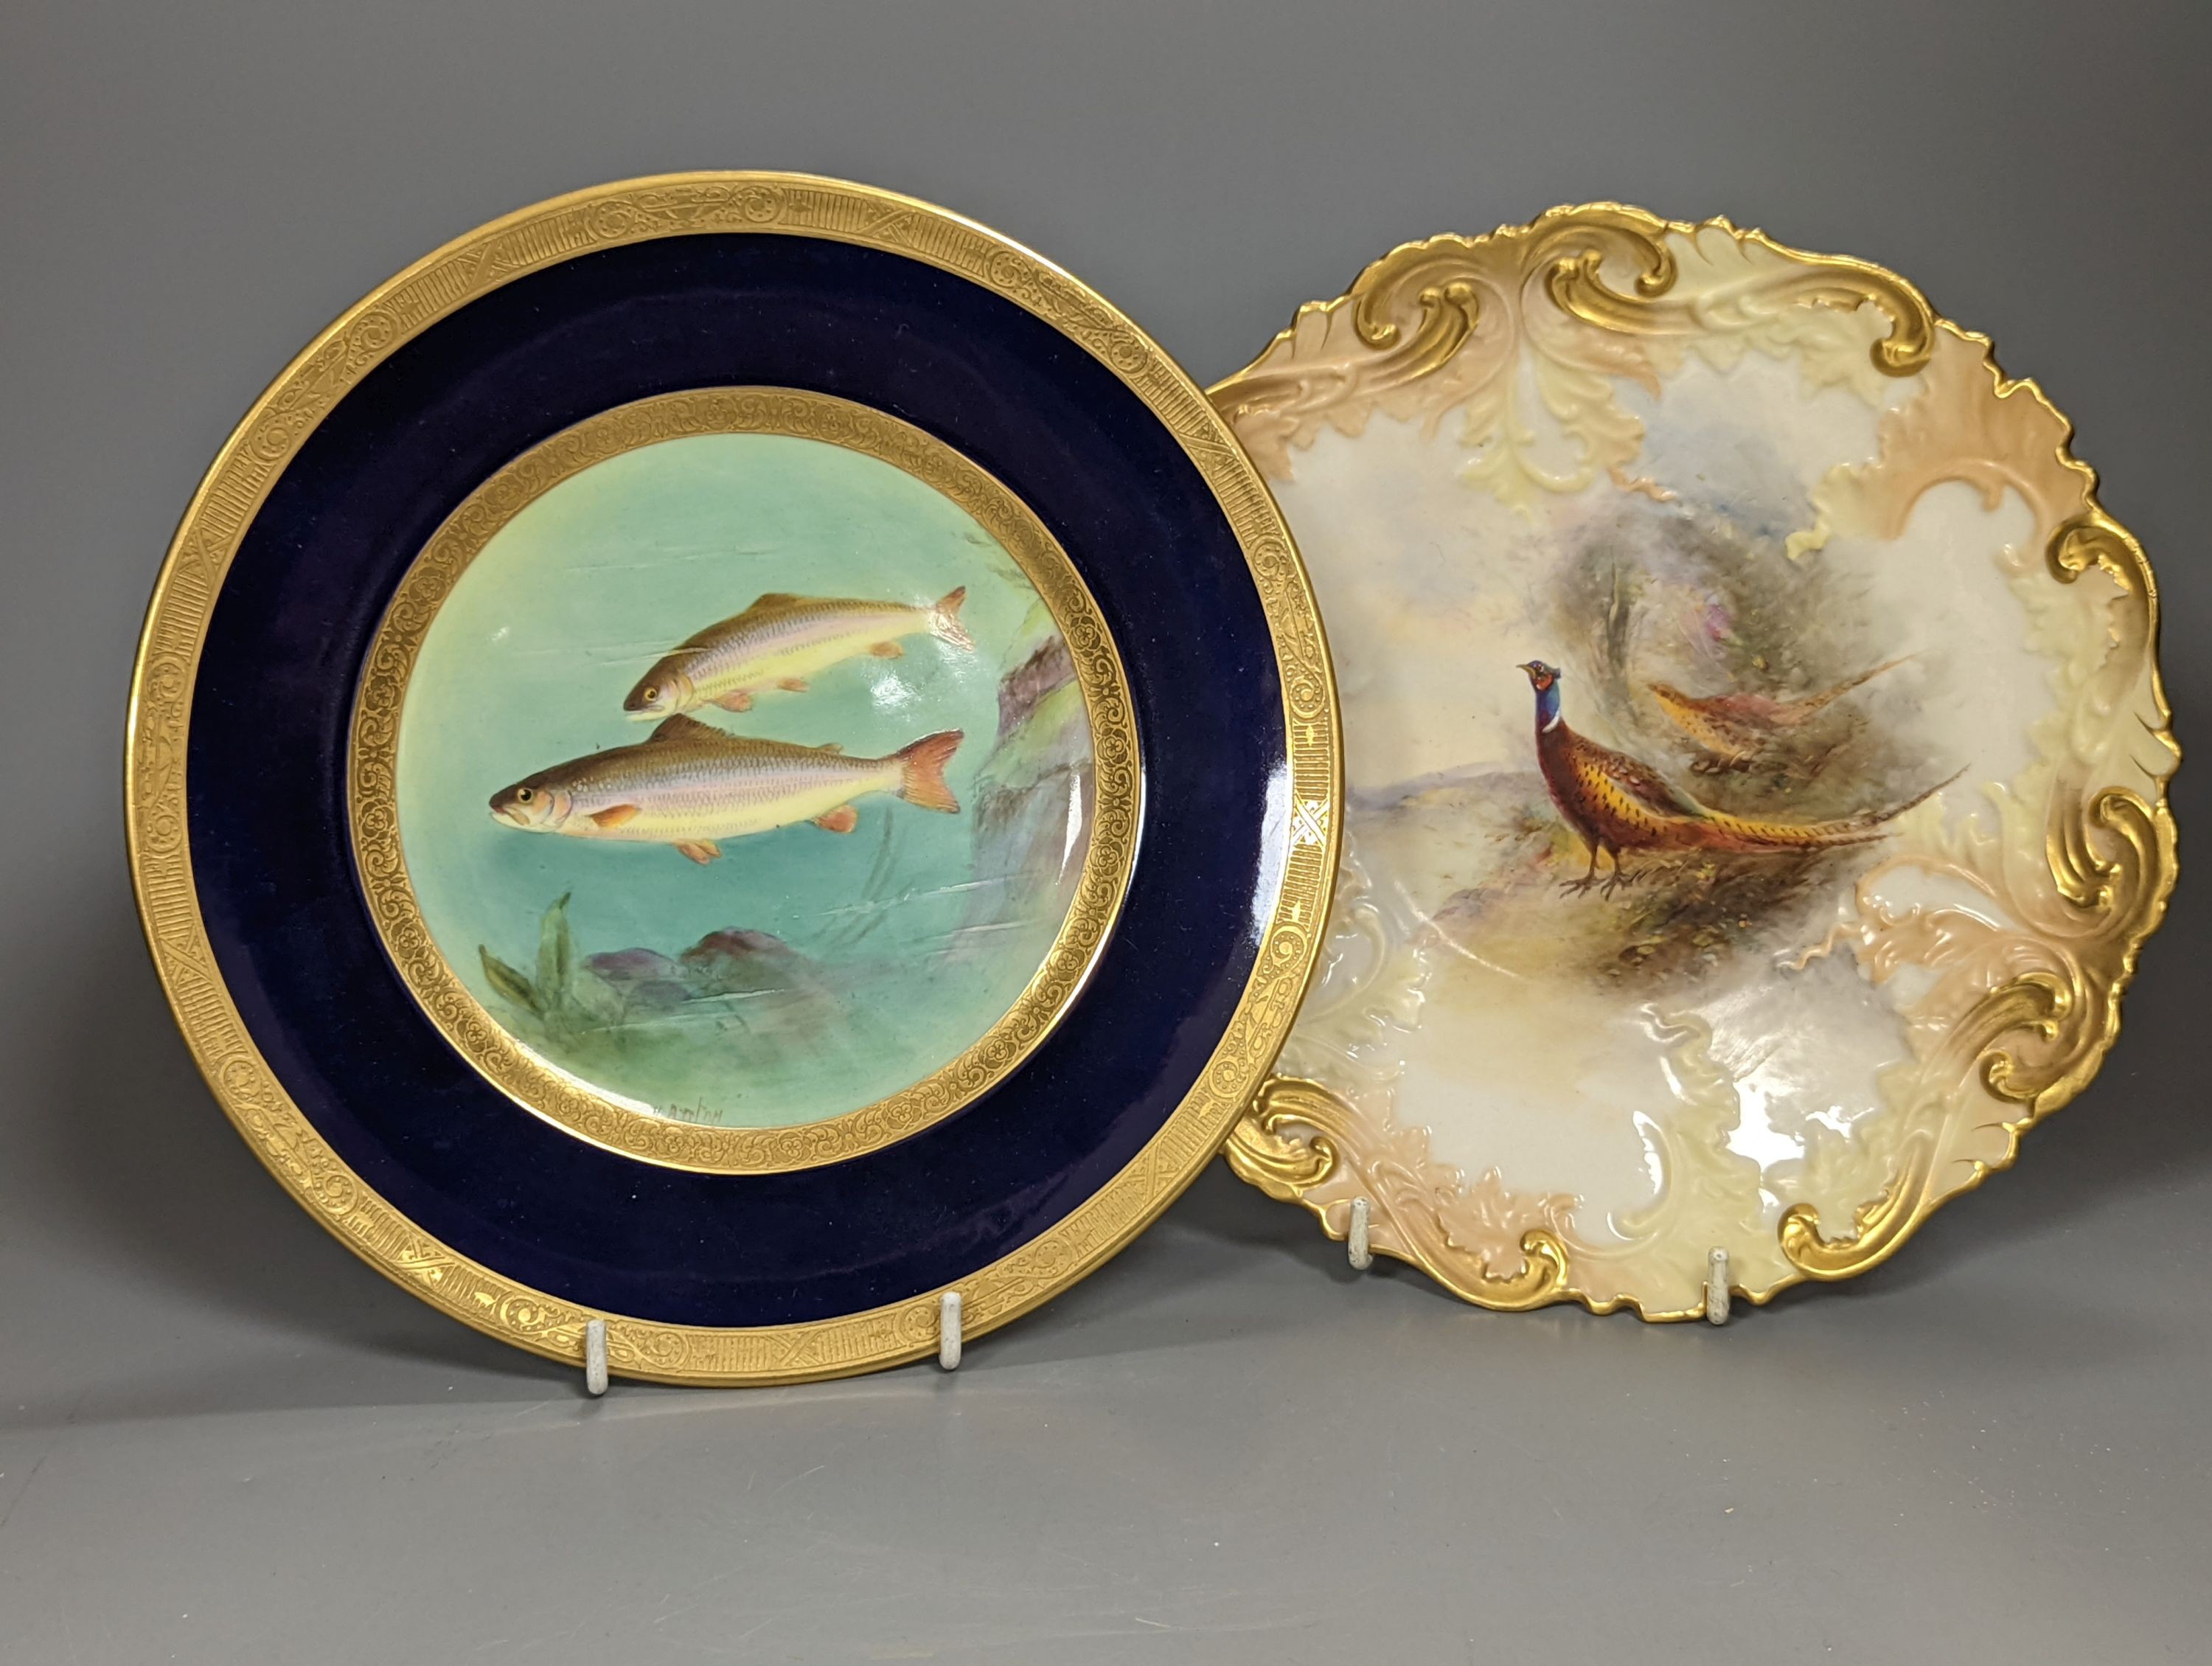 A Royal Worcester moulded plate painted with a brace of pheasants by James Stinton, not signed, date mark 1909 and a Royal Worcester fine plate painted with swimming fish, titled Char, by Harry Aryton, signed date mark f